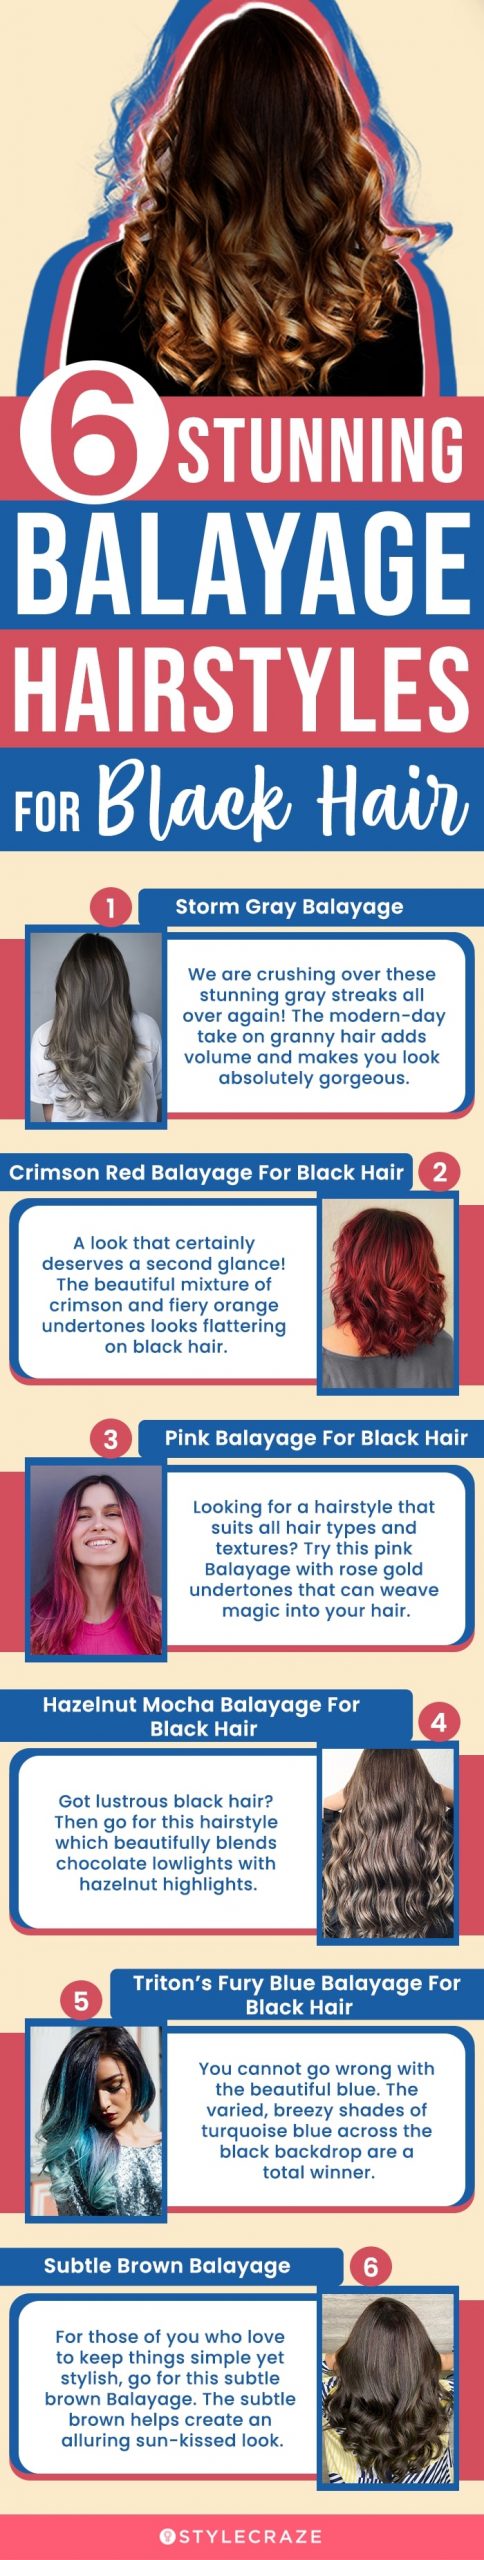 6 stunning balayage hairstyles for black hair (infographic)